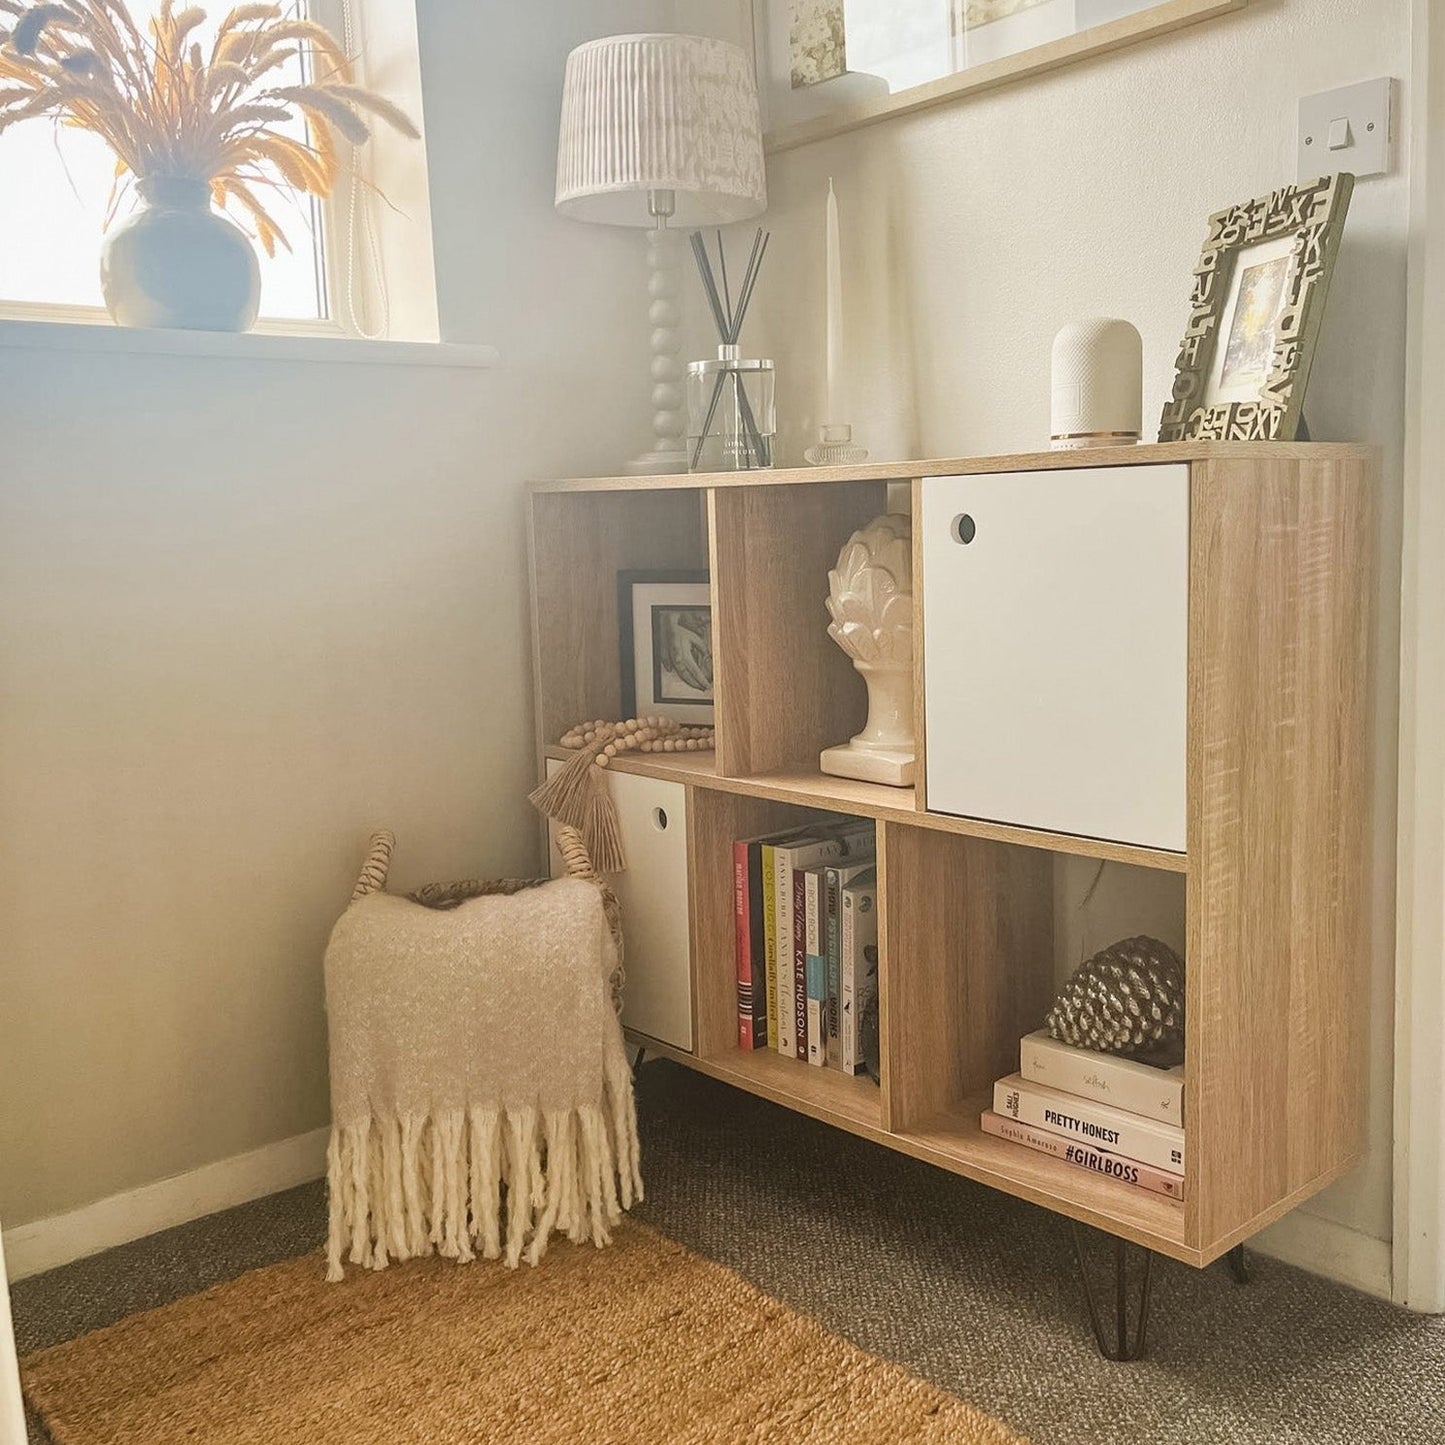 Anderson cube storage unit  - Oak effect with white cupboards